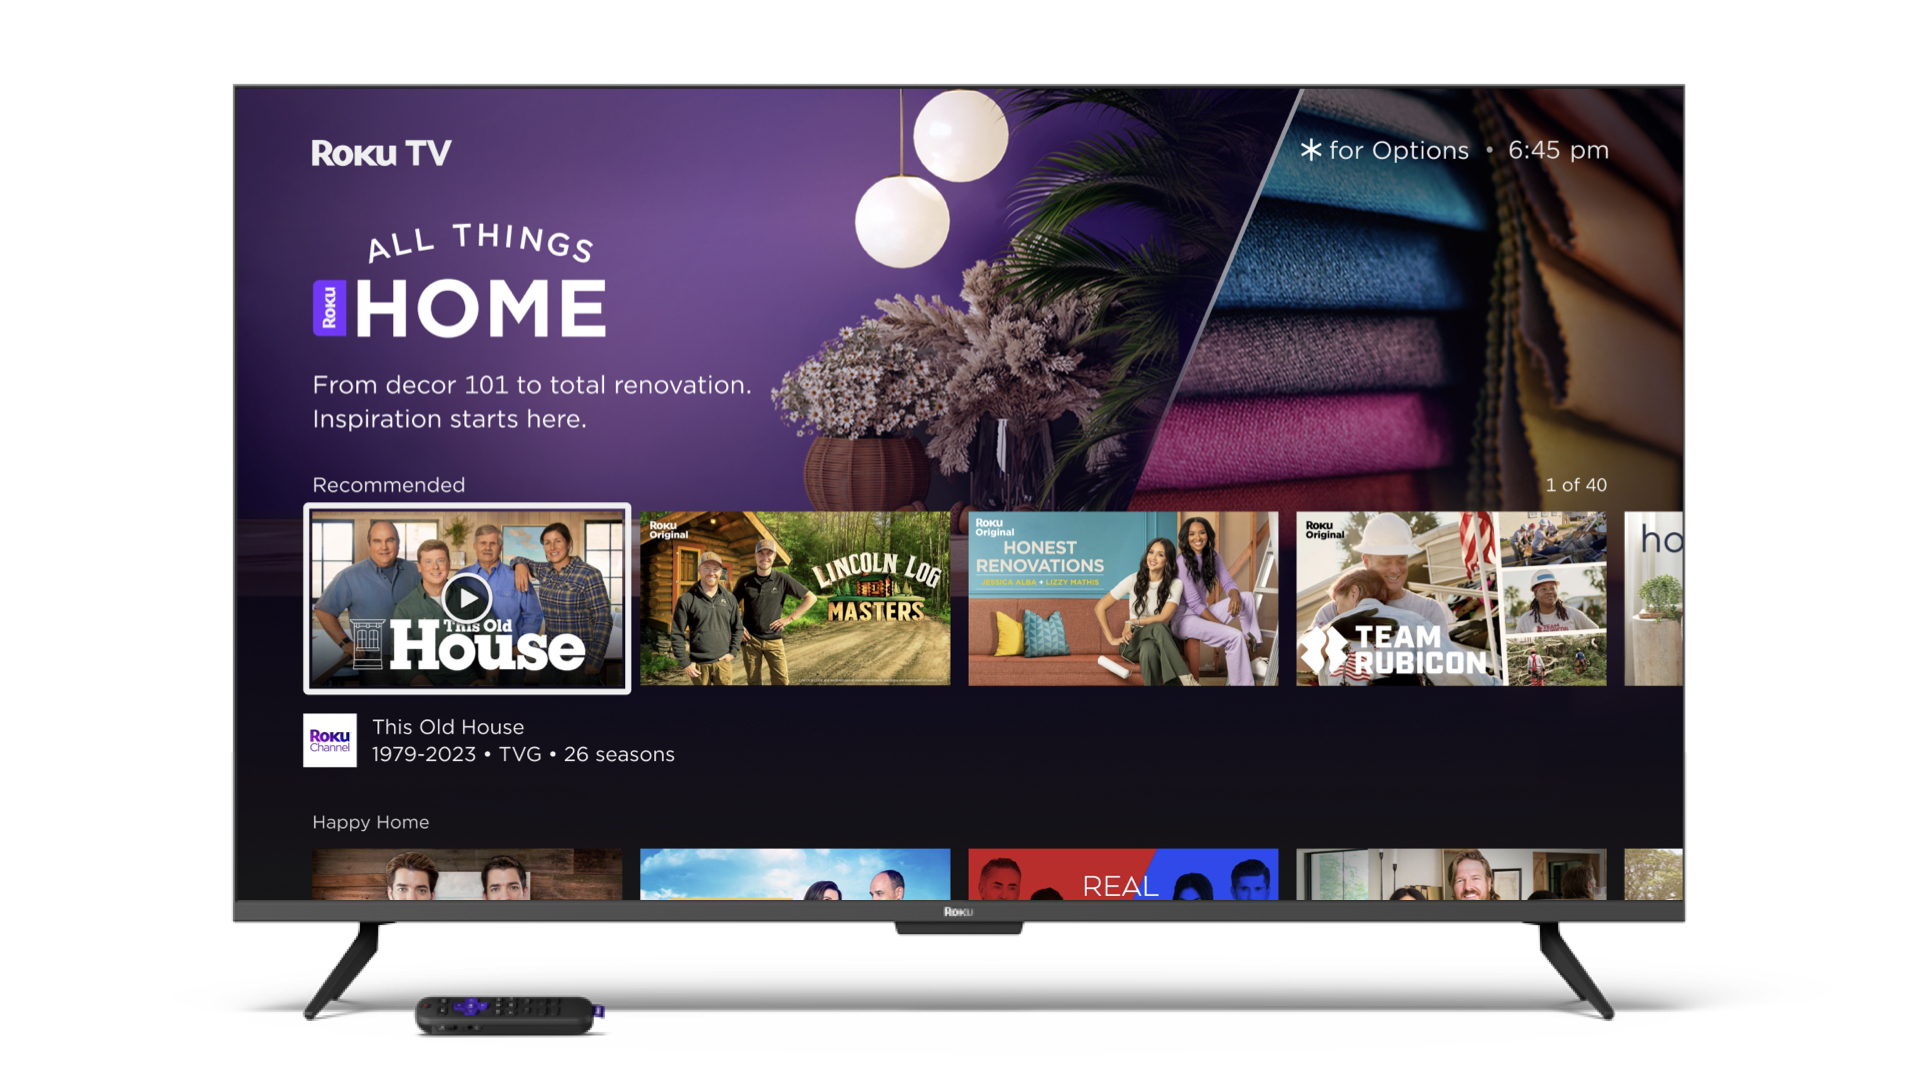 Roku Updates Its  Home Screen With New “All Things” Destinations